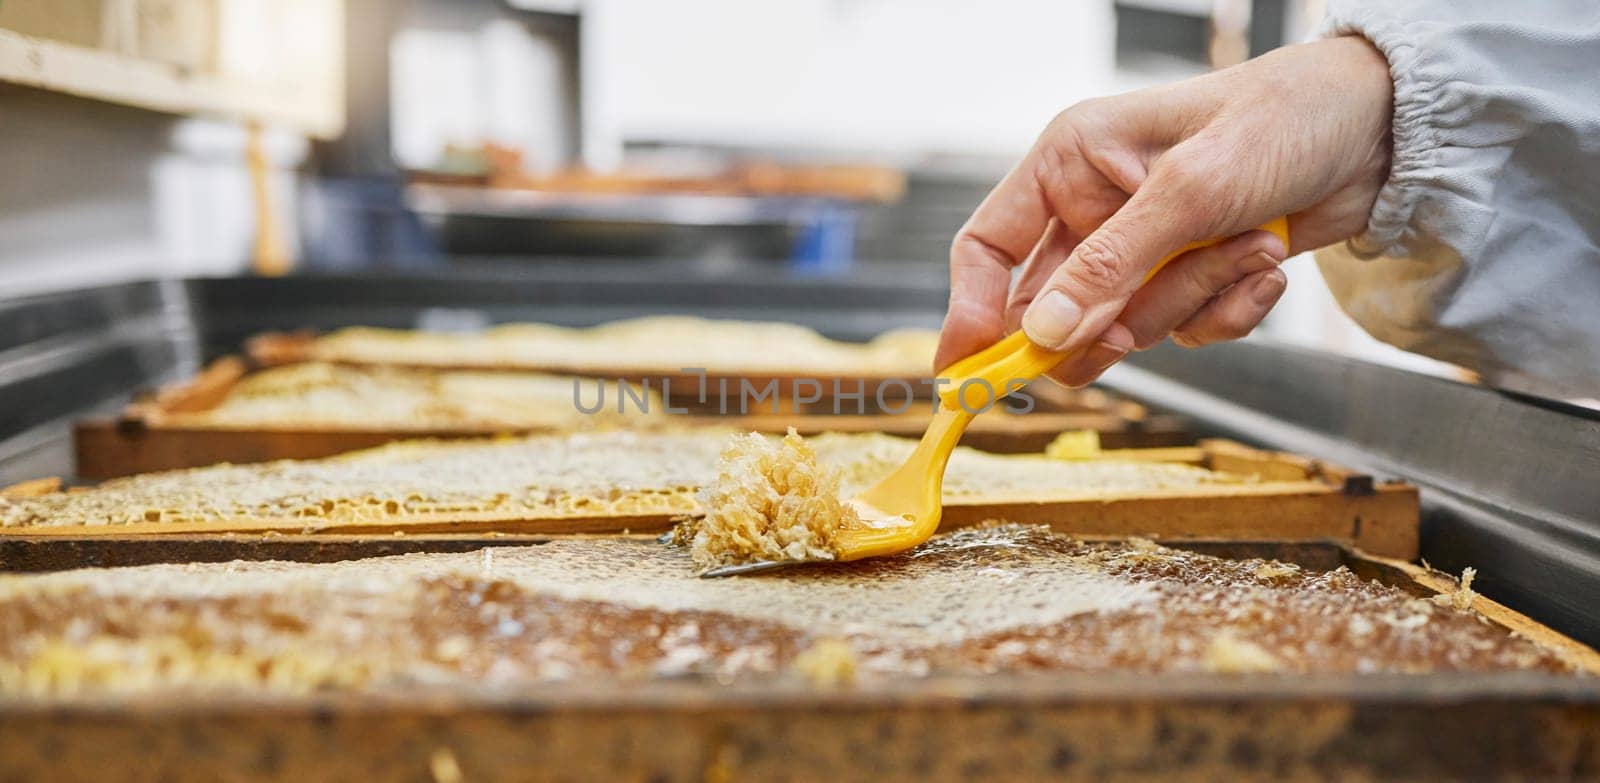 Hands, honeycomb and harvest tools for beeswax, farming and eco friendly production. Beekeeper, worker and propolis process on frame for natural product, manufacturing and sustainability in ecology.